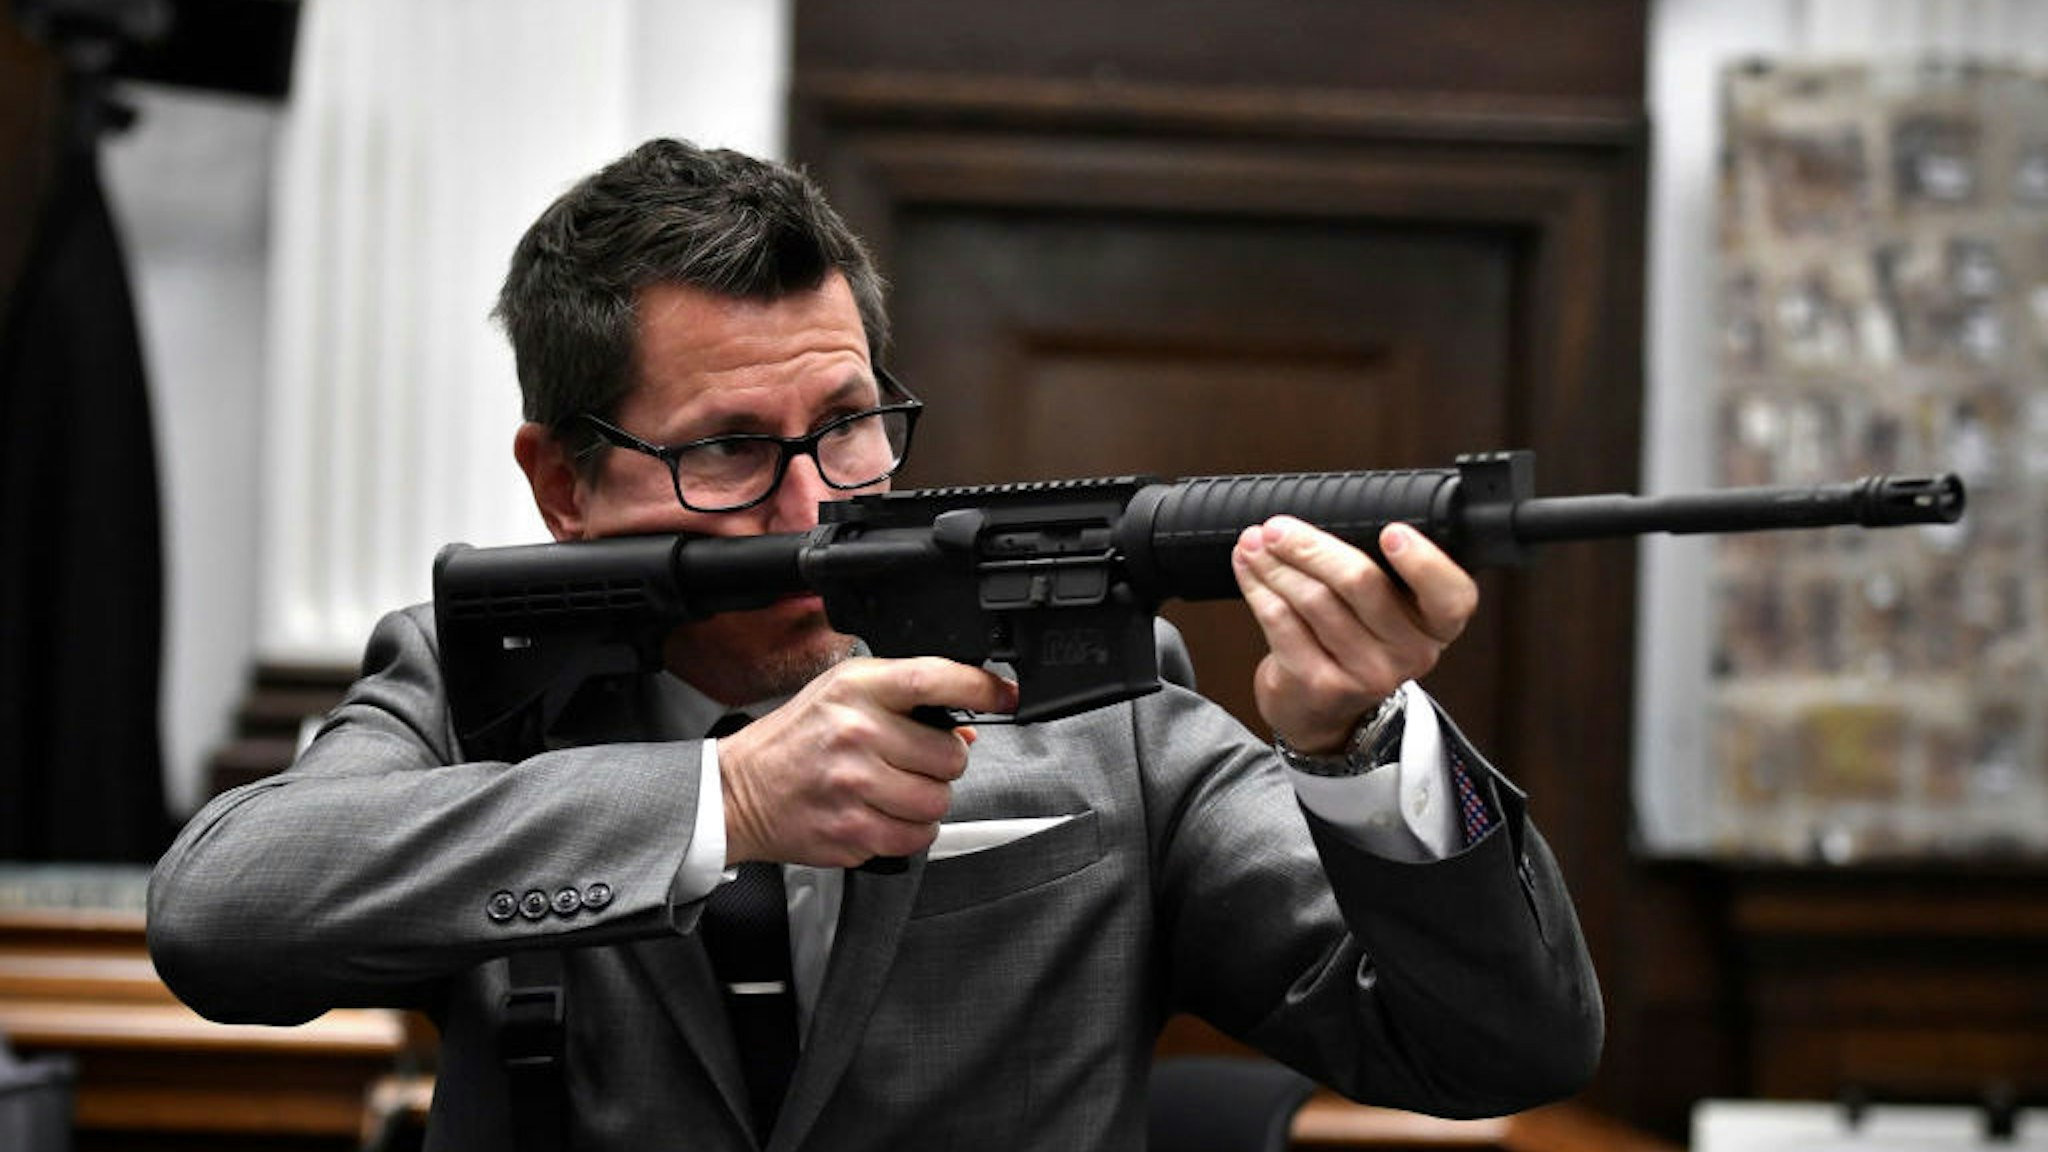 KENOSHA, WISCONSIN - NOVEMBER 15: Assistant District Attorney Thomas Binger holds Kyle Rittenhouse's gun as he gives the state's closing argument in Kyle Rittenhouse's trial at the Kenosha County Courthouse on November 15, 2021 in Kenosha, Wisconsin. Rittenhouse is accused of shooting three demonstrators, killing two of them, during a night of unrest that erupted in Kenosha after a police officer shot Jacob Blake seven times in the back while being arrested in August 2020. Rittenhouse, from Antioch, Illinois, was 17 at the time of the shooting and armed with an assault rifle. He faces counts of felony homicide and felony attempted homicide. (Photo by Sean Krajacic-Pool/Getty Images)